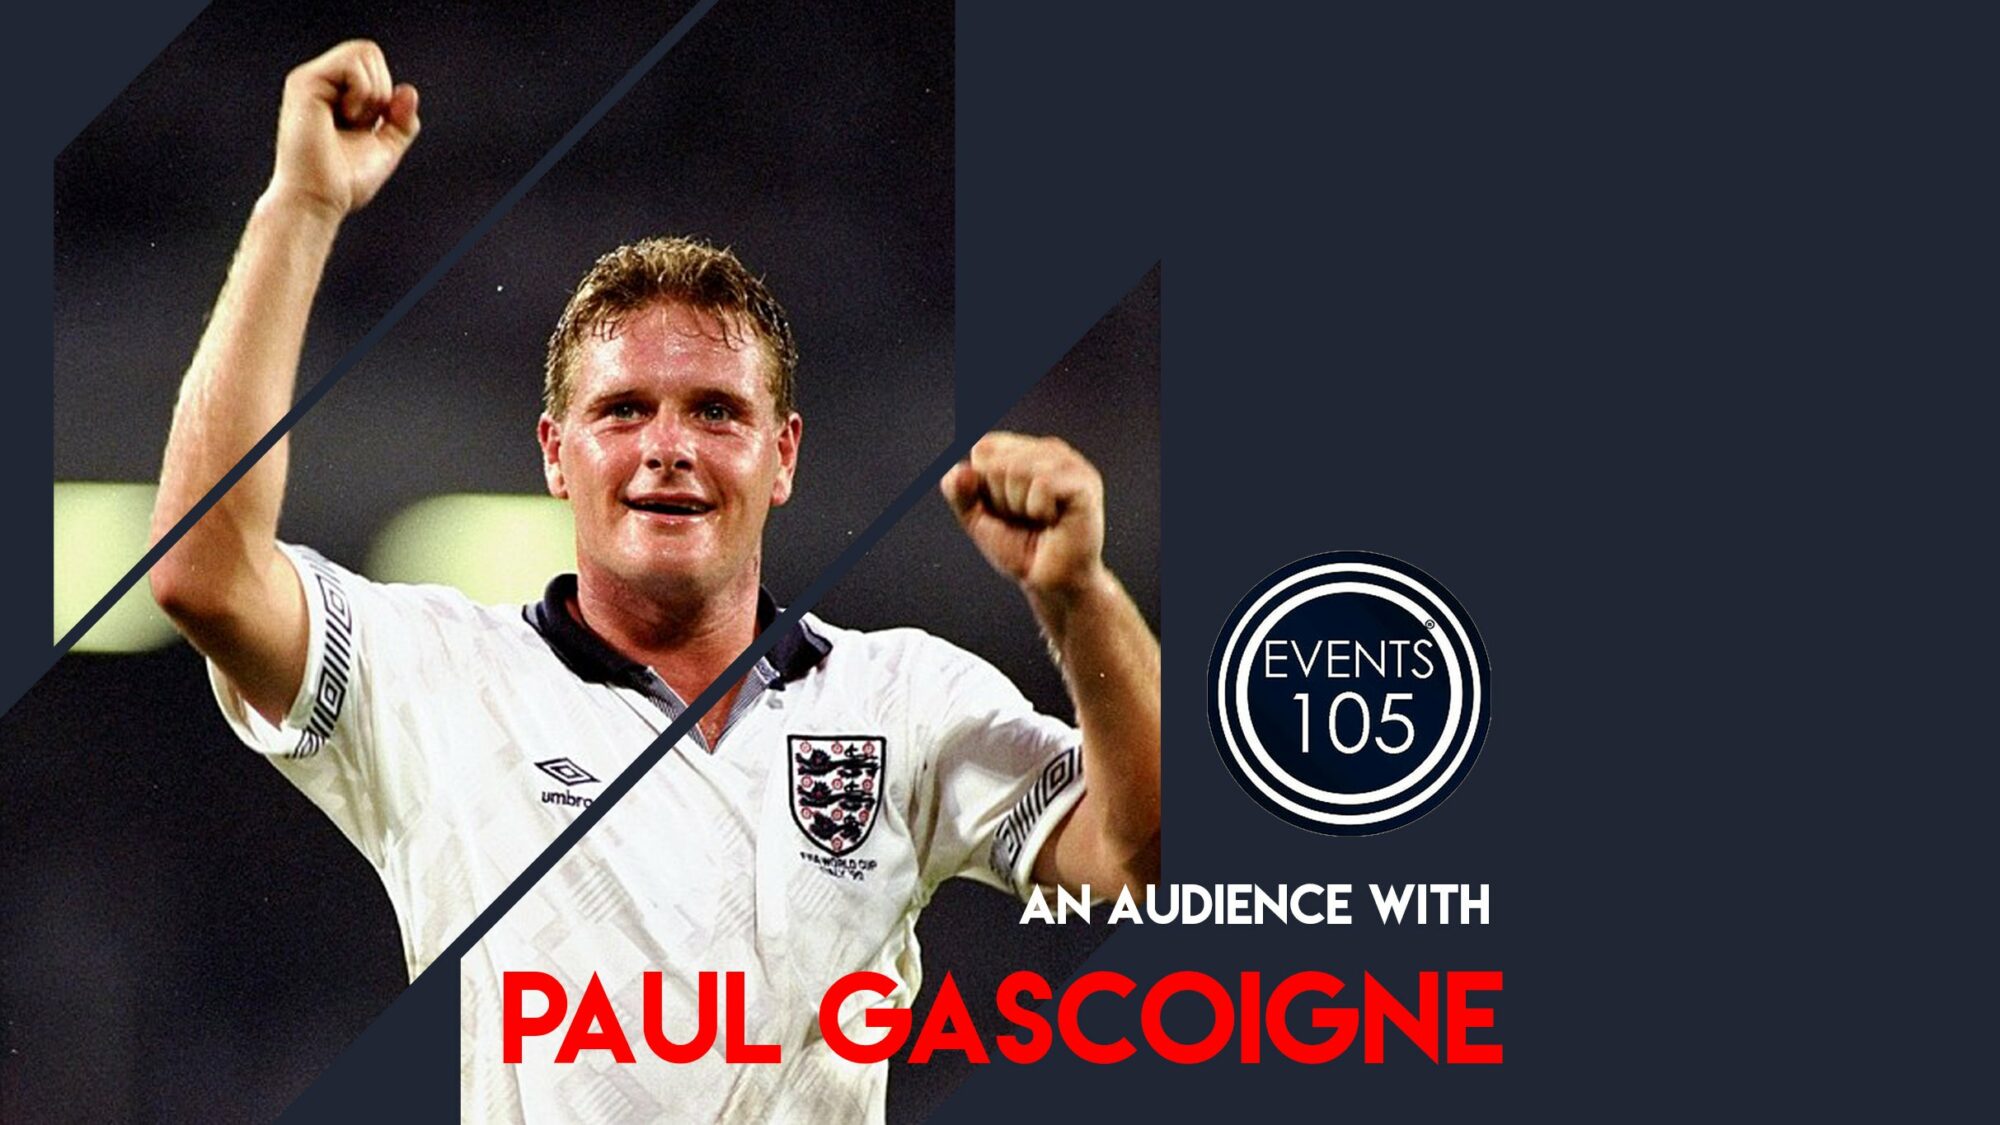 Image name An Evening with Paul Gascoigne at Doncaster Dome Doncaster the 7 image from the post Events in Yorkshire.com.